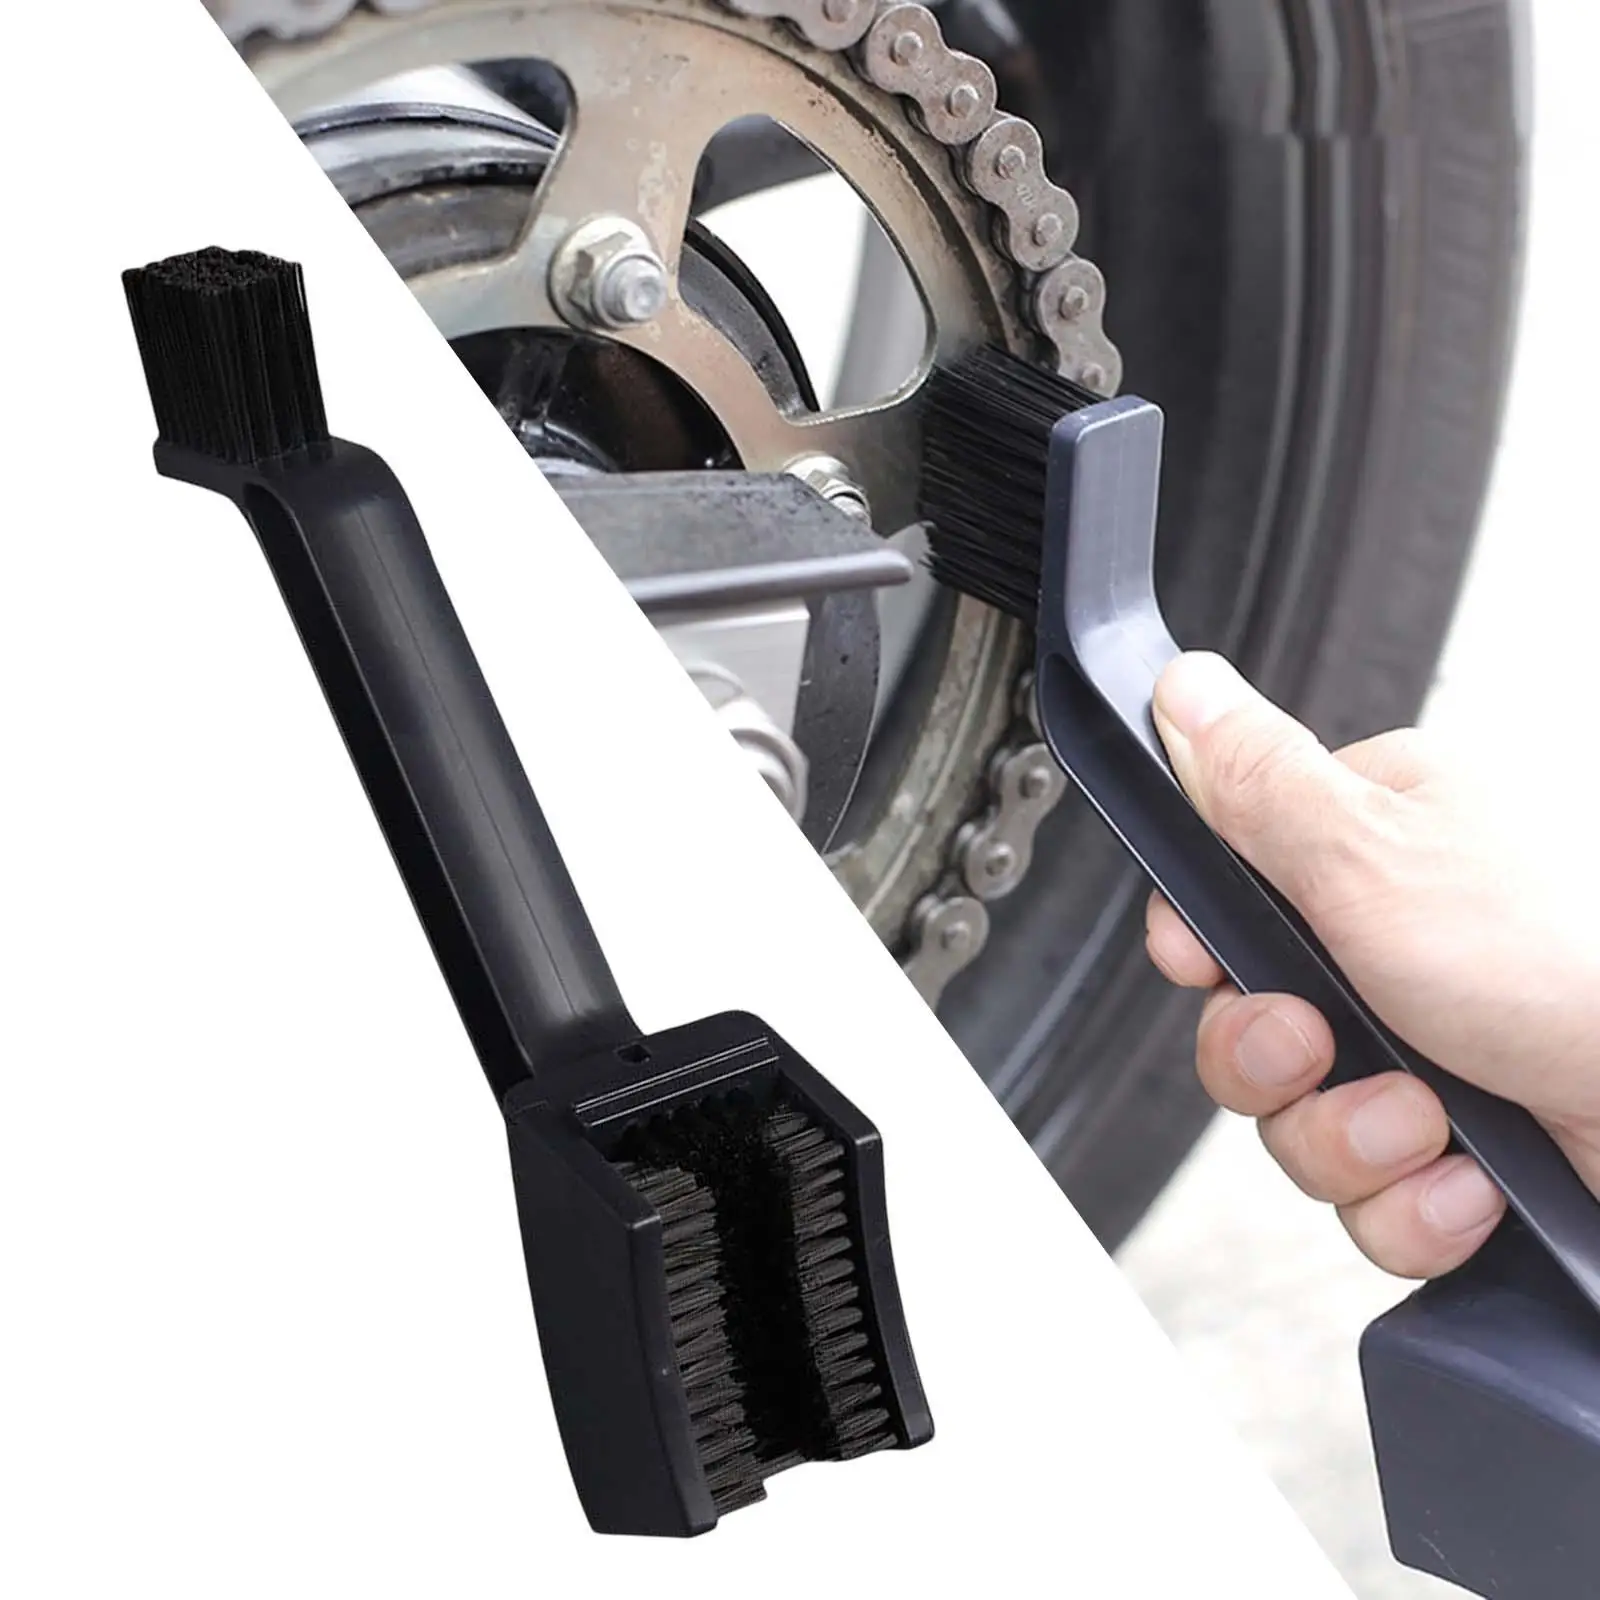 Motorcycle Bike Chain Cleaner Plastic Cycling Maintenance Gear Wash Tool